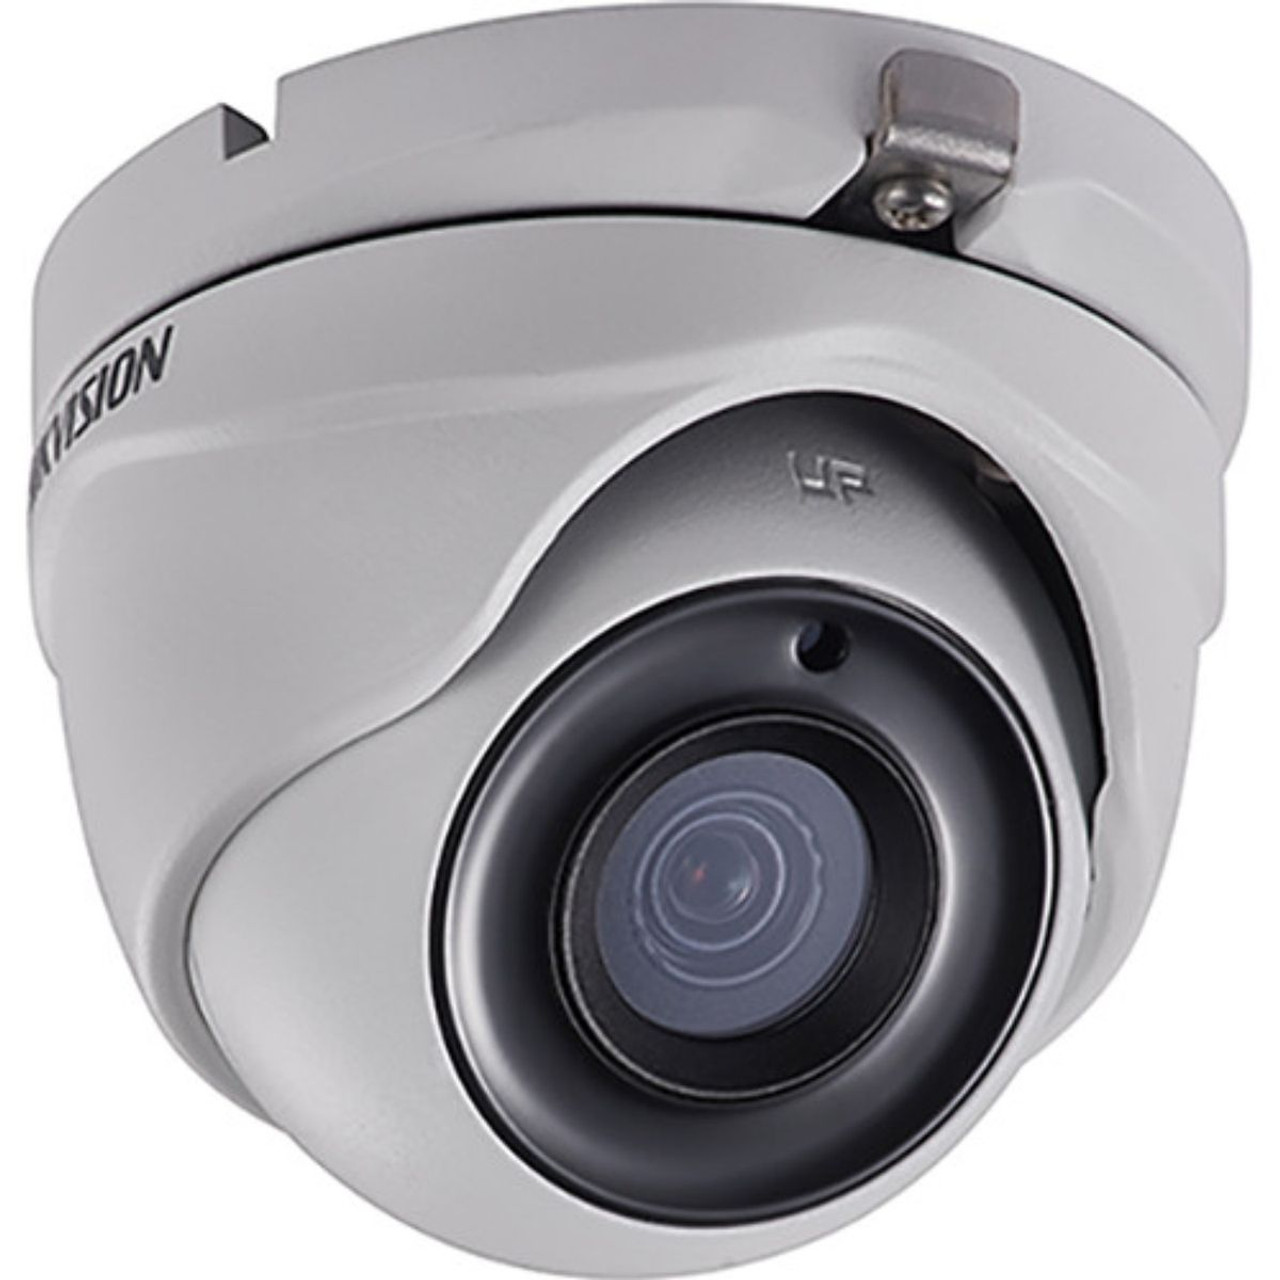 Hikvision 2MP 1080p IR True WDR DNR 3.6mm Outdoor Security Camera product image